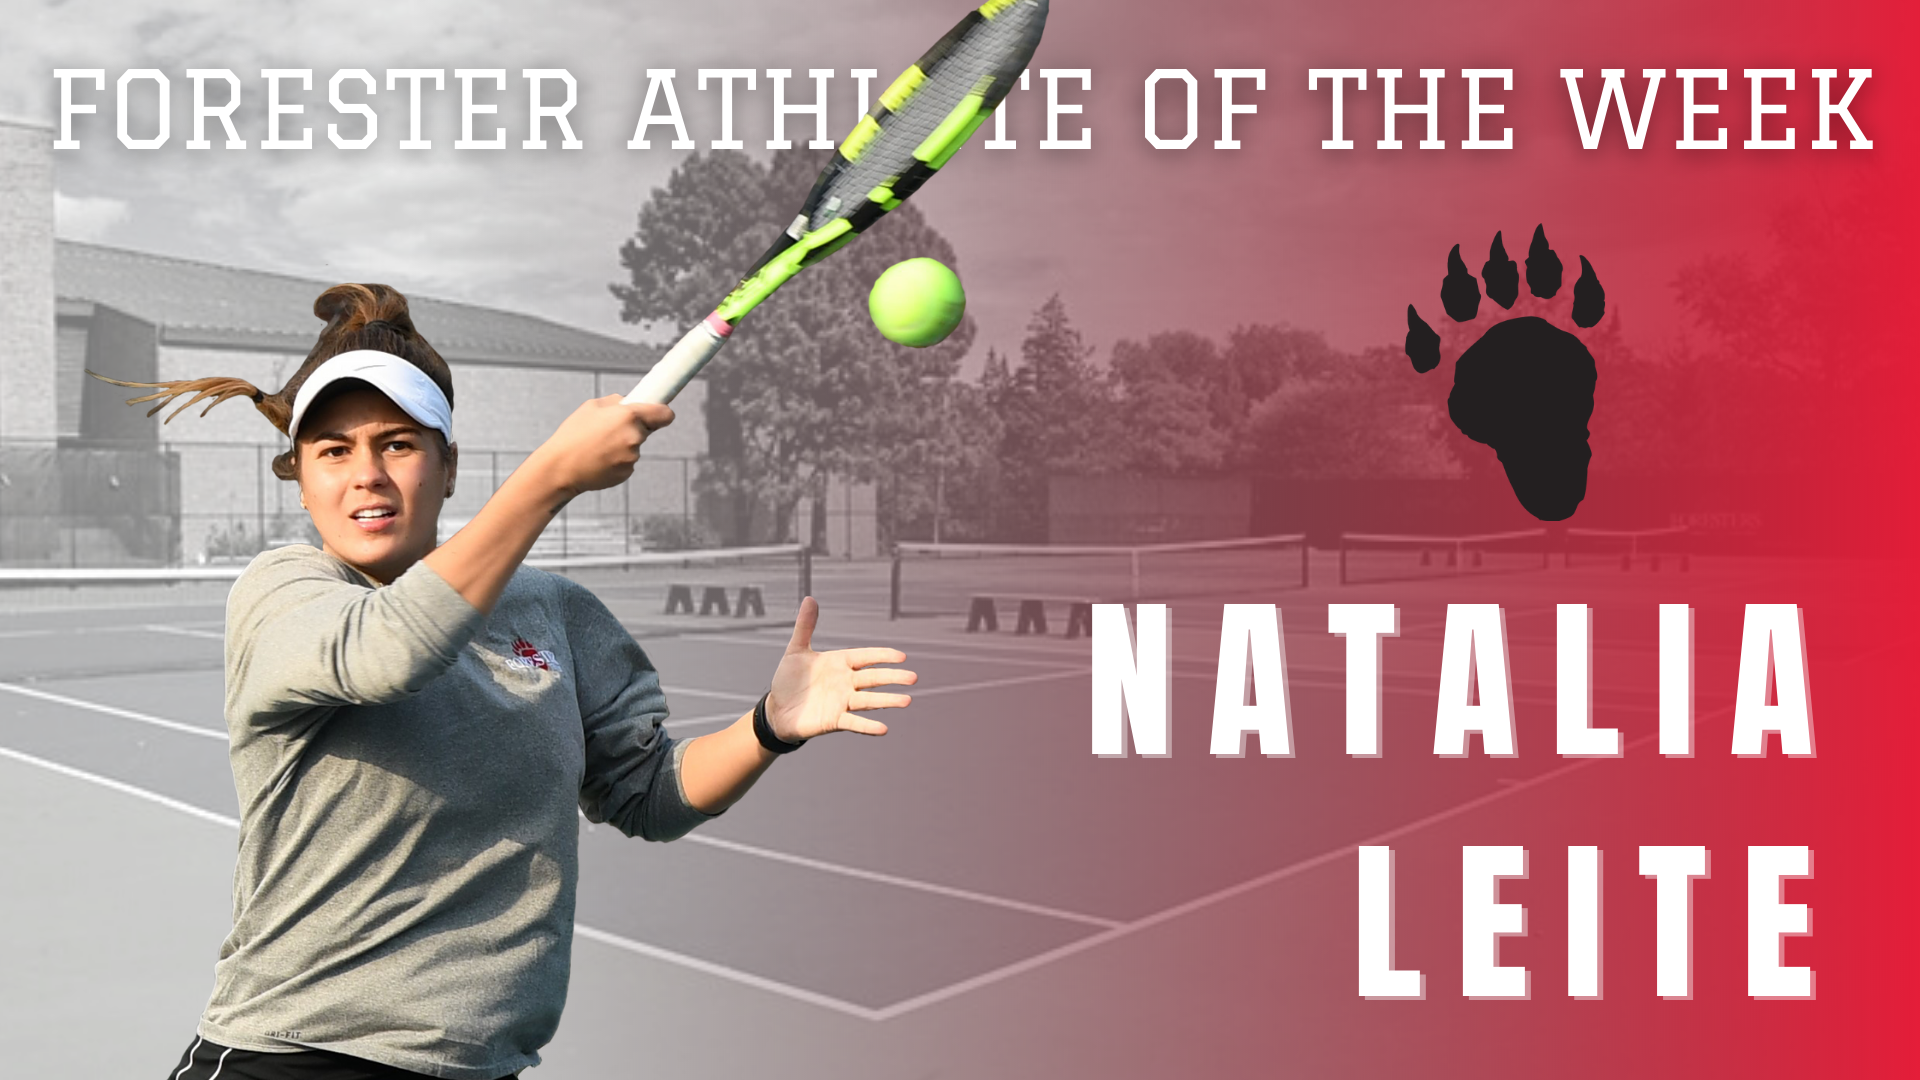 Natalia Leite Named Forester Athlete of the Week